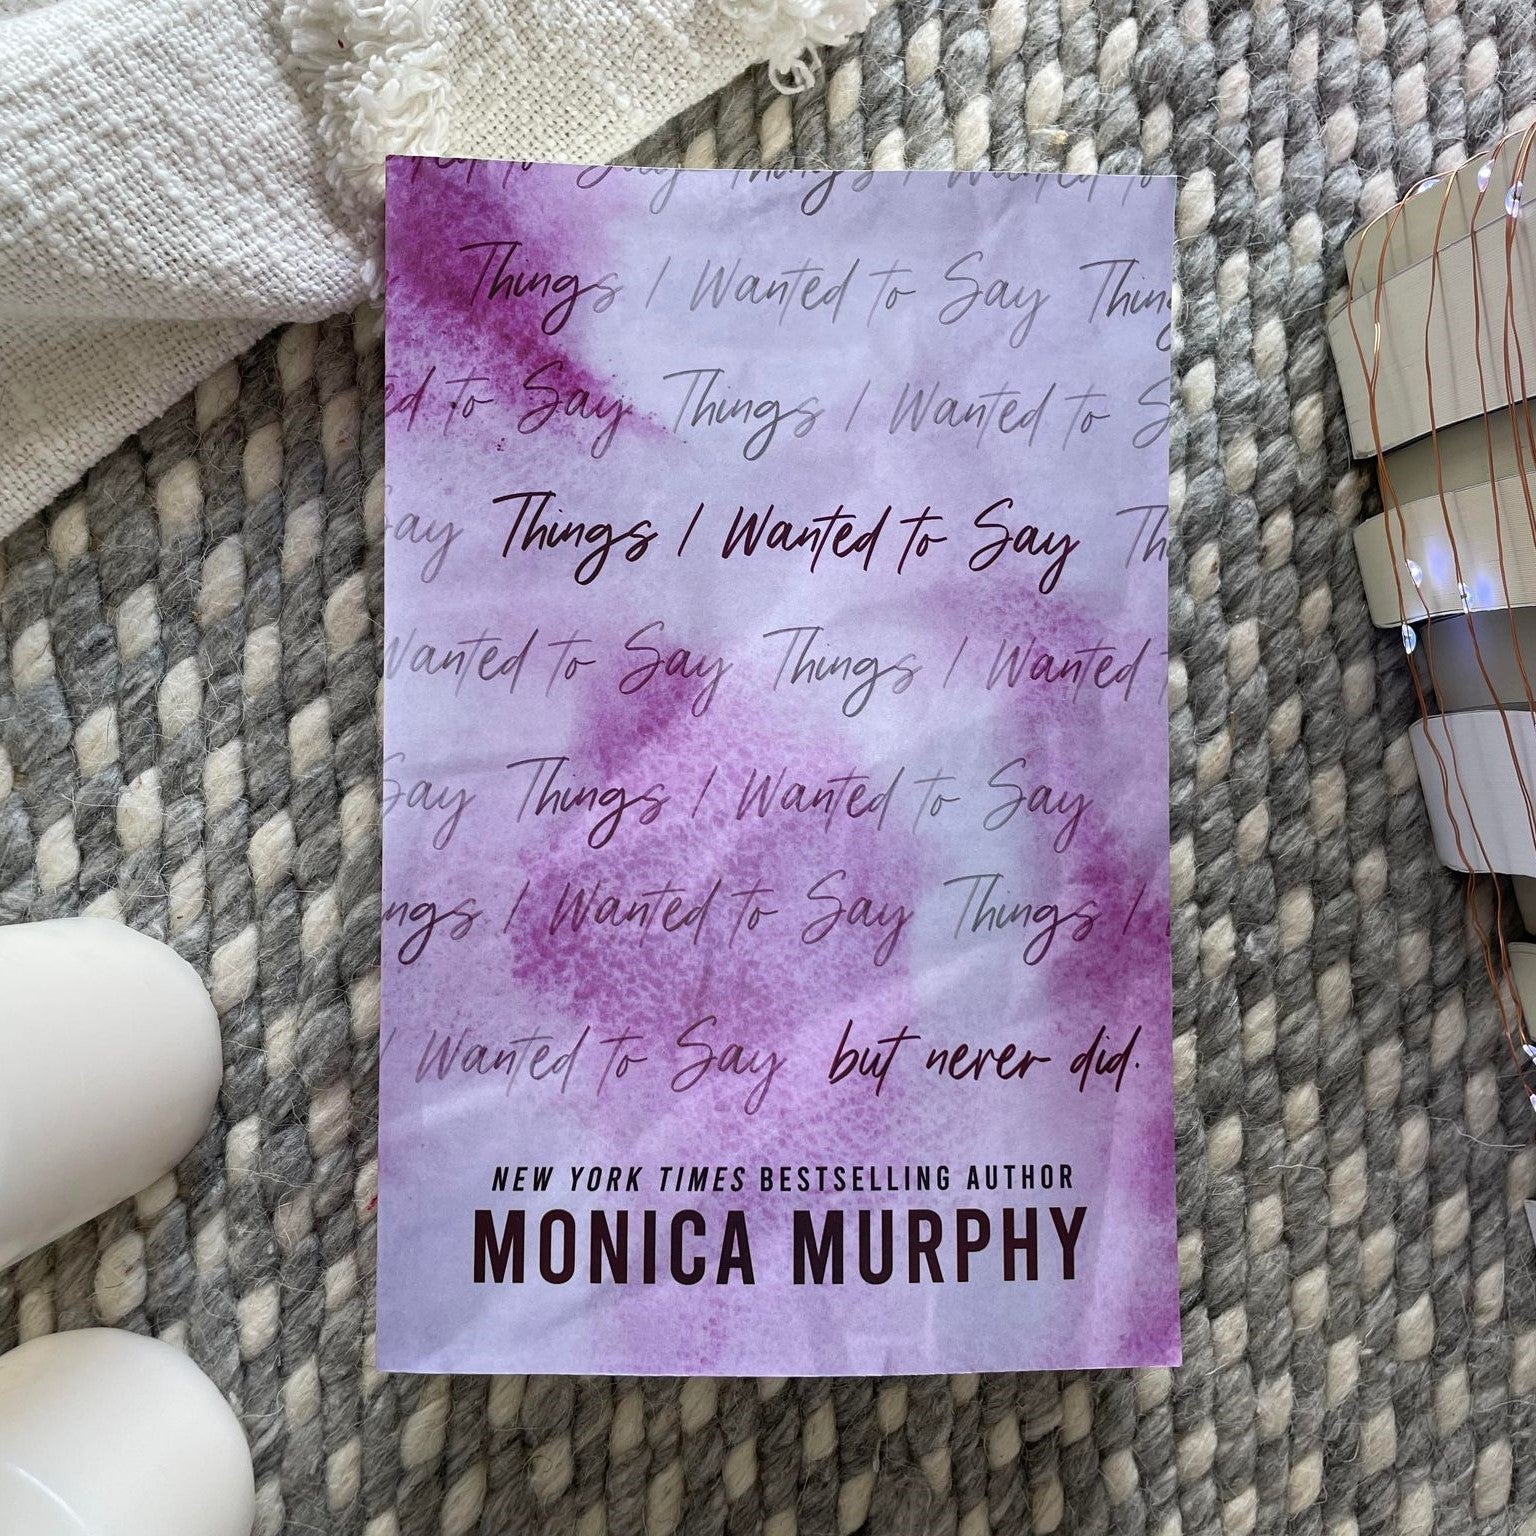 Things I Wanted To Say by Monica Murphy